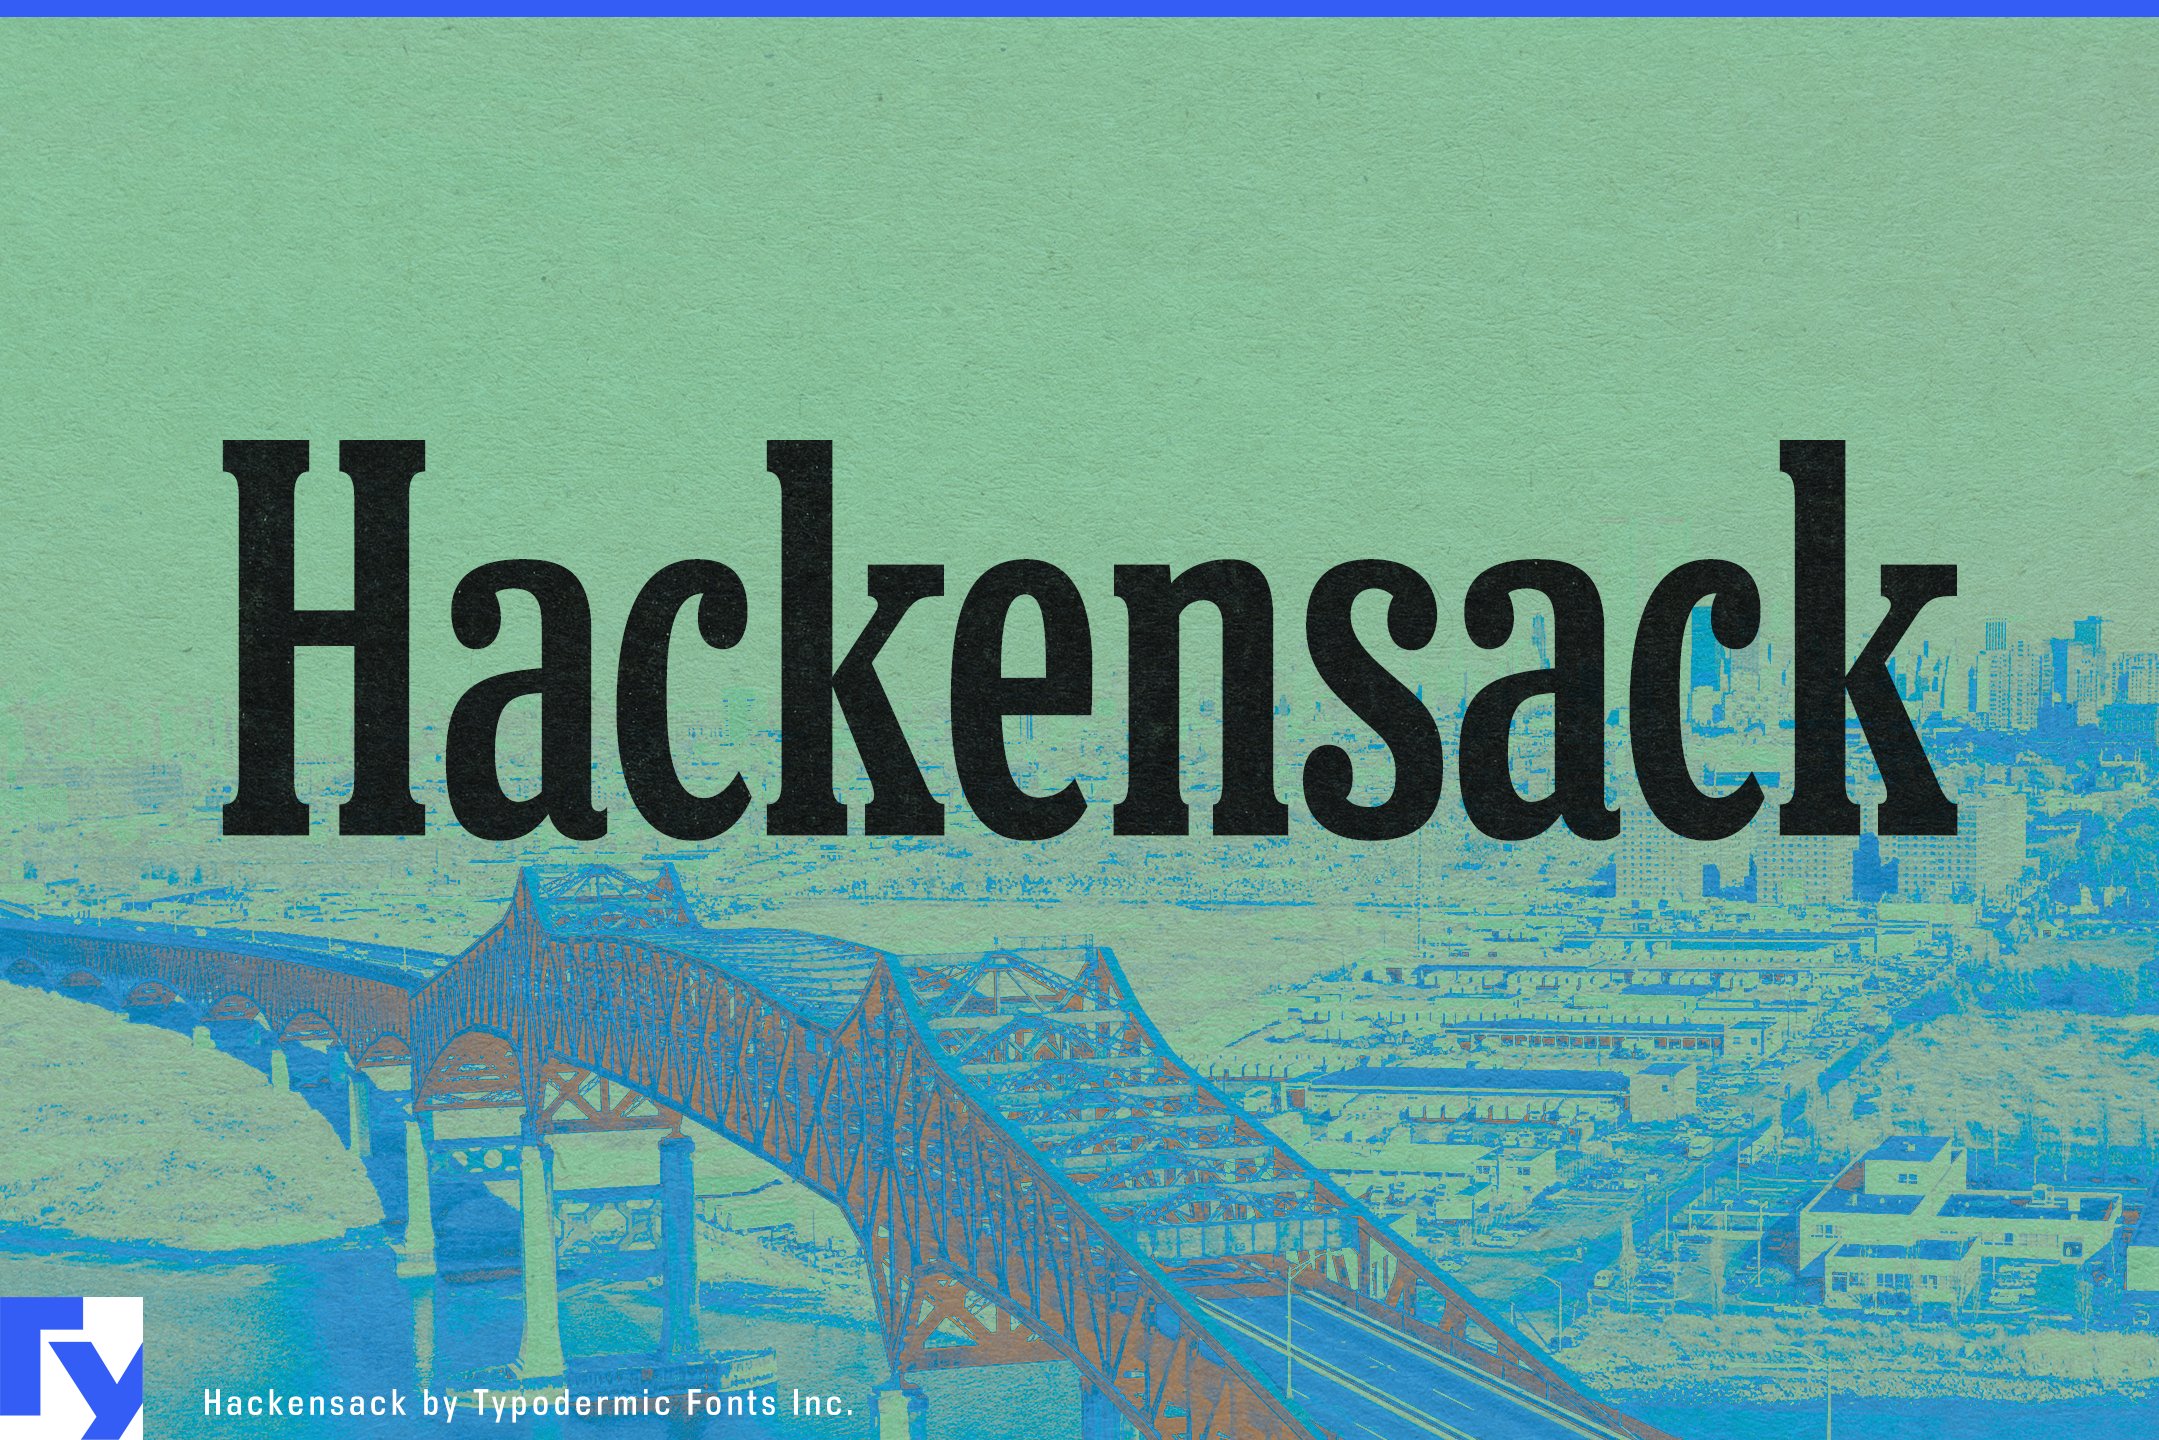 Hackensack cover image.